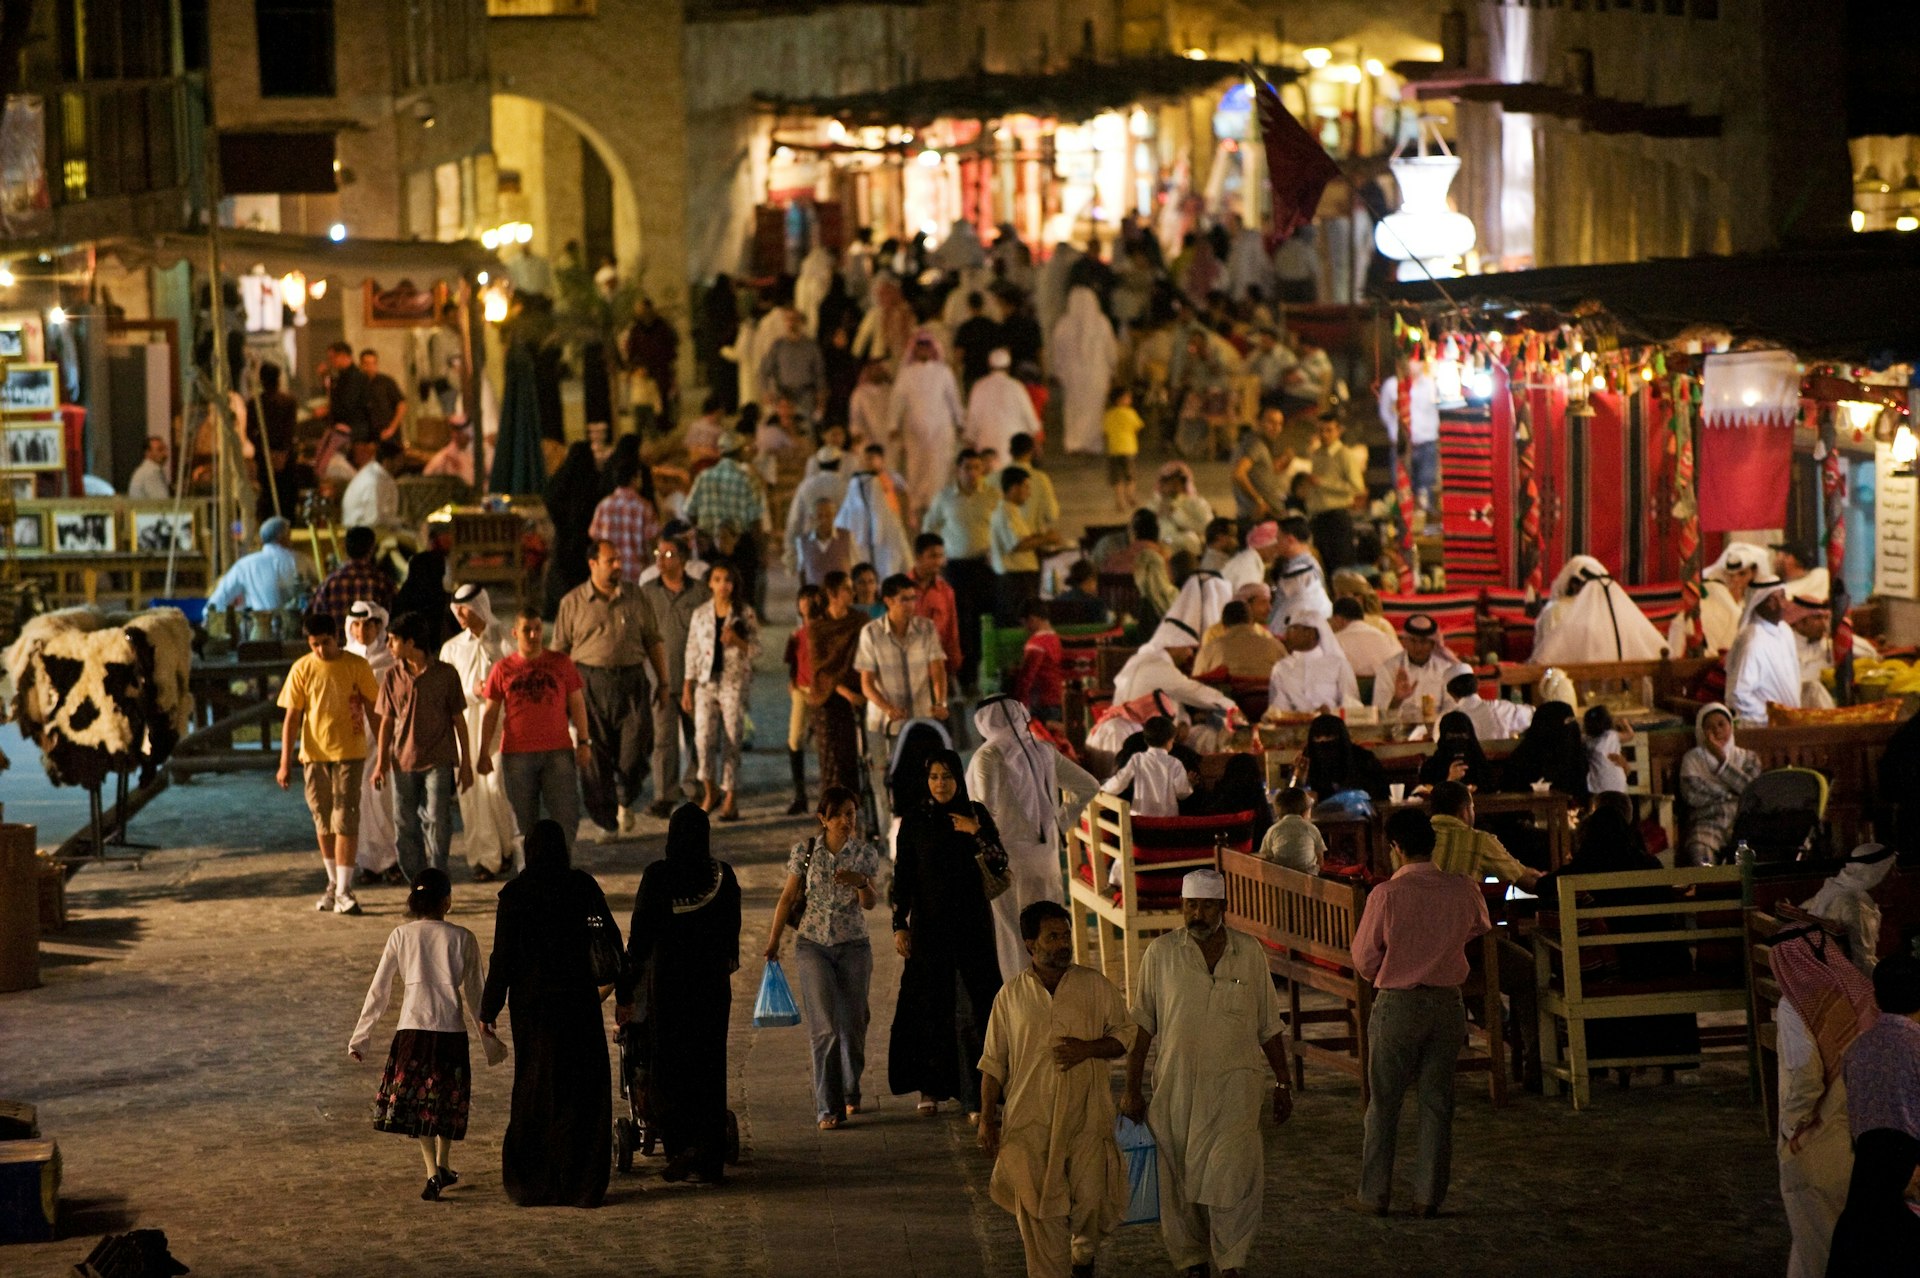 A busy evening a Souq Waqif. Image by Terry McCormick / Getty Images